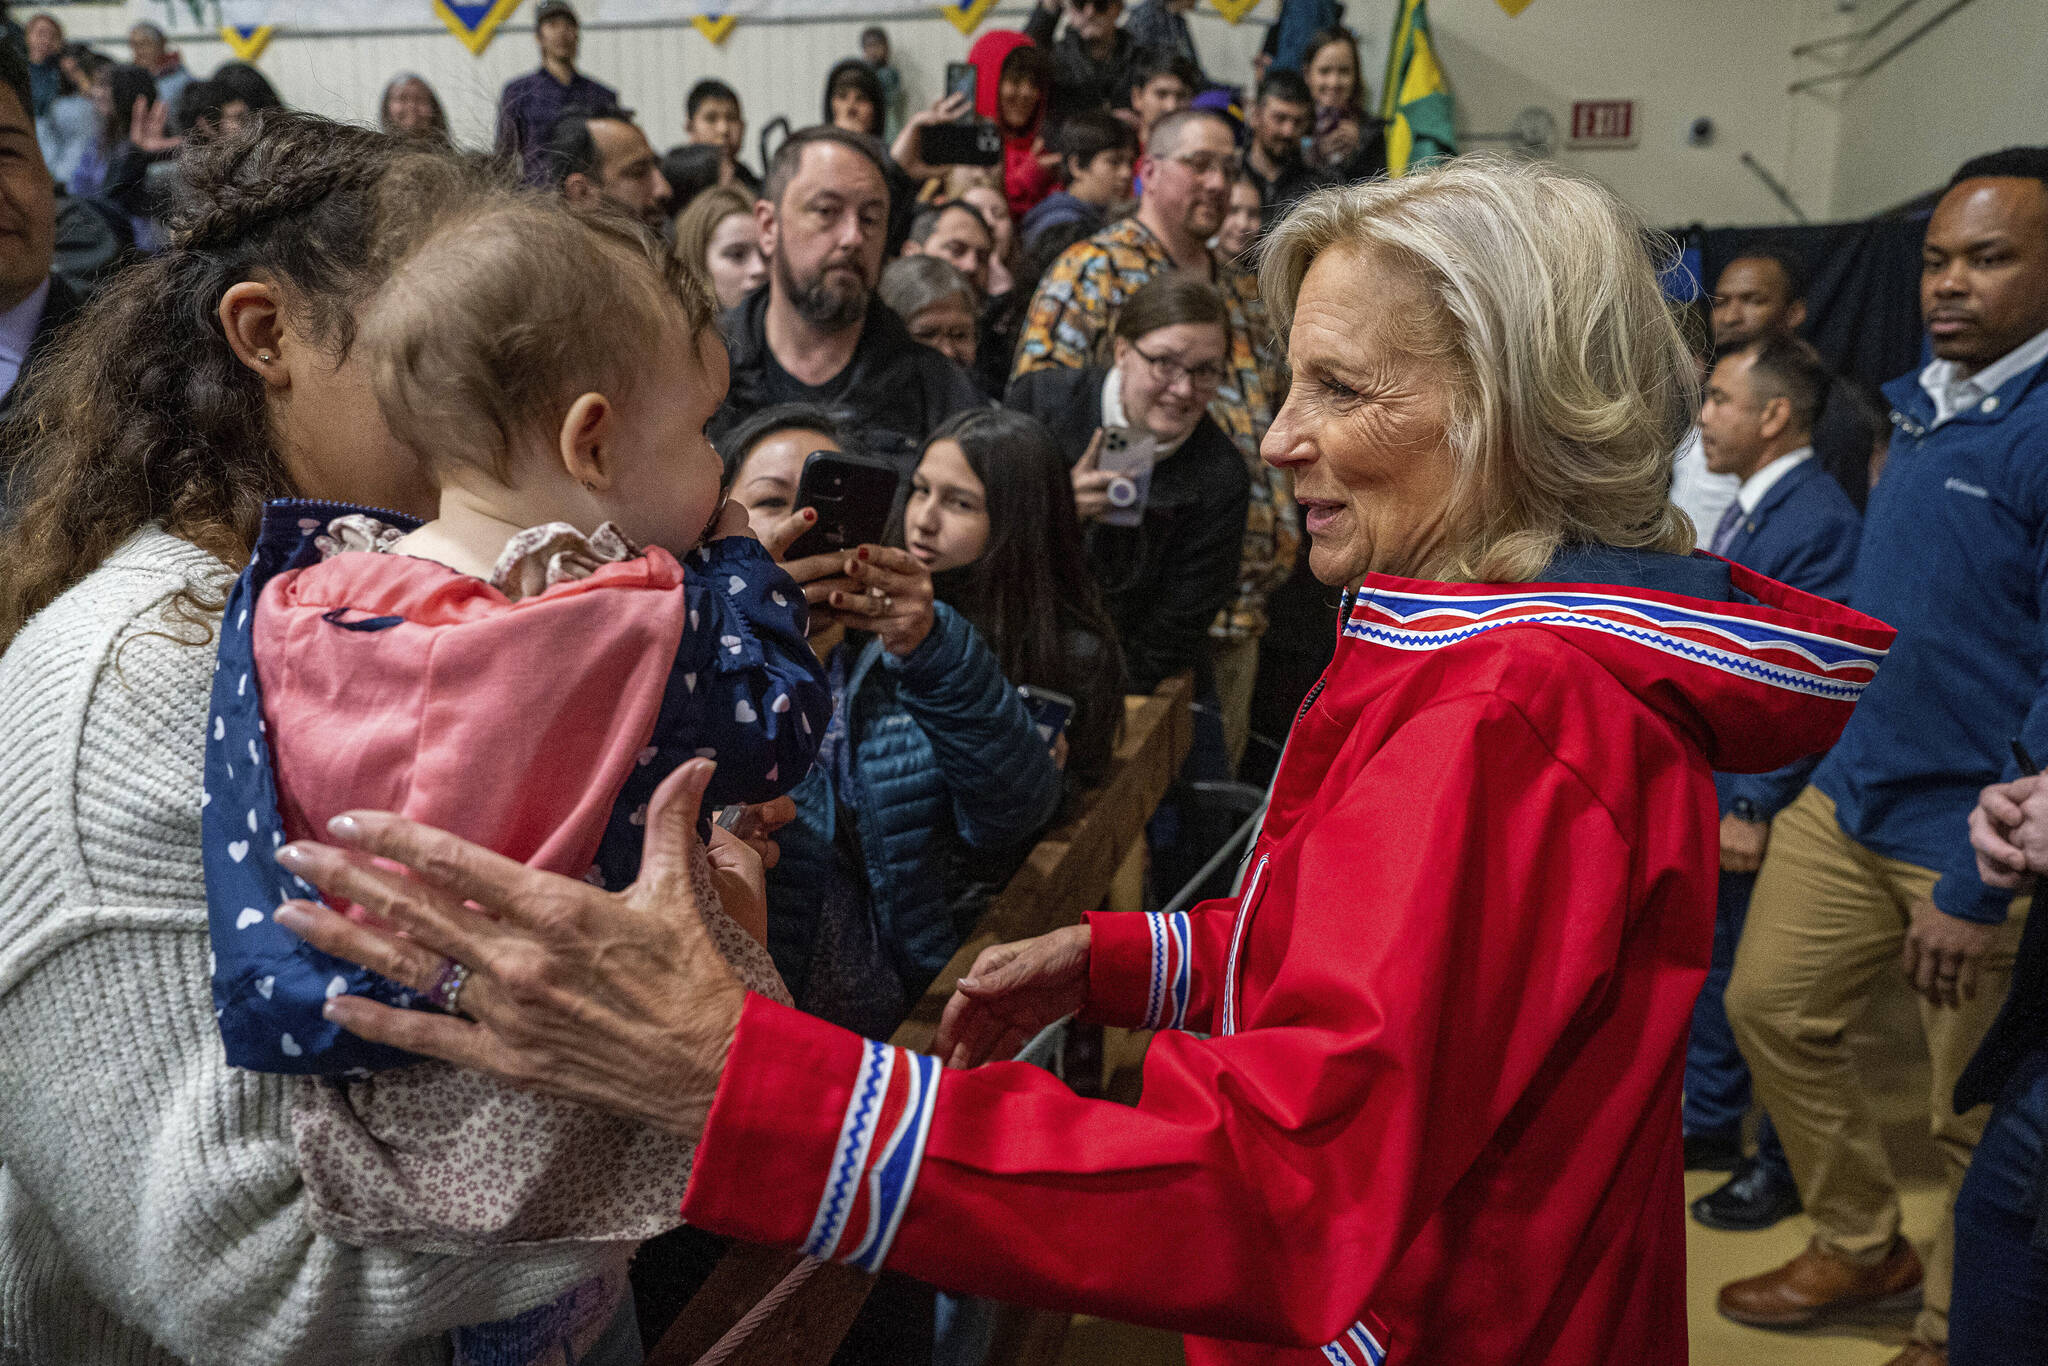 First lady Jill Biden greets Bethel residents Coralie Williams, 7 months, and her mom Courtney Williams, after an event at Bethel Regional High School in Bethel, Alaska on Wednesday, May 17, 2023. Biden and Interior Secretary Deb Haaland traveled to Bethel to highlight the Biden-Harris administration’s investments to expand broadband internet connectivity in Native American communities, including Alaska’s Yukon-Kuskokwim Delta. (Loren Holmes/Anchorage Daily News via AP)